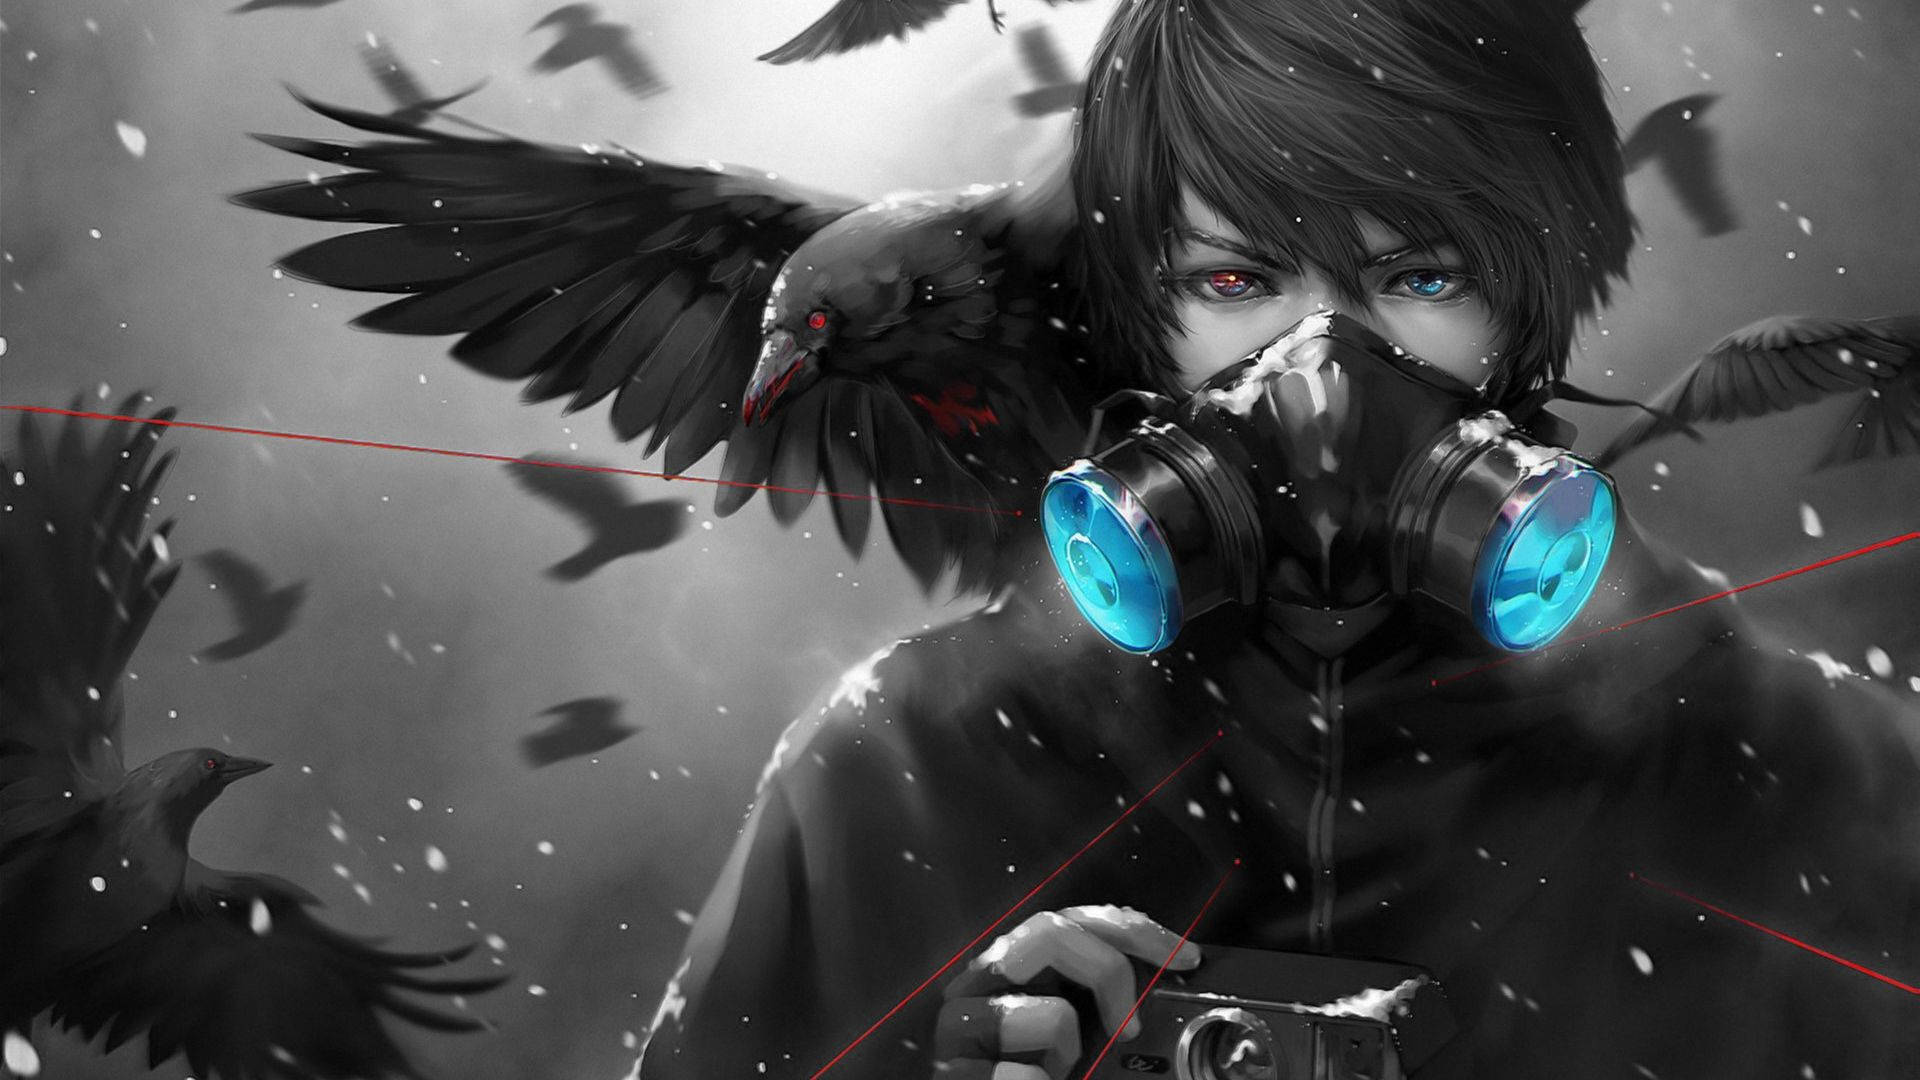 Edgy Anime Pfp Crow And Boy Wallpaper